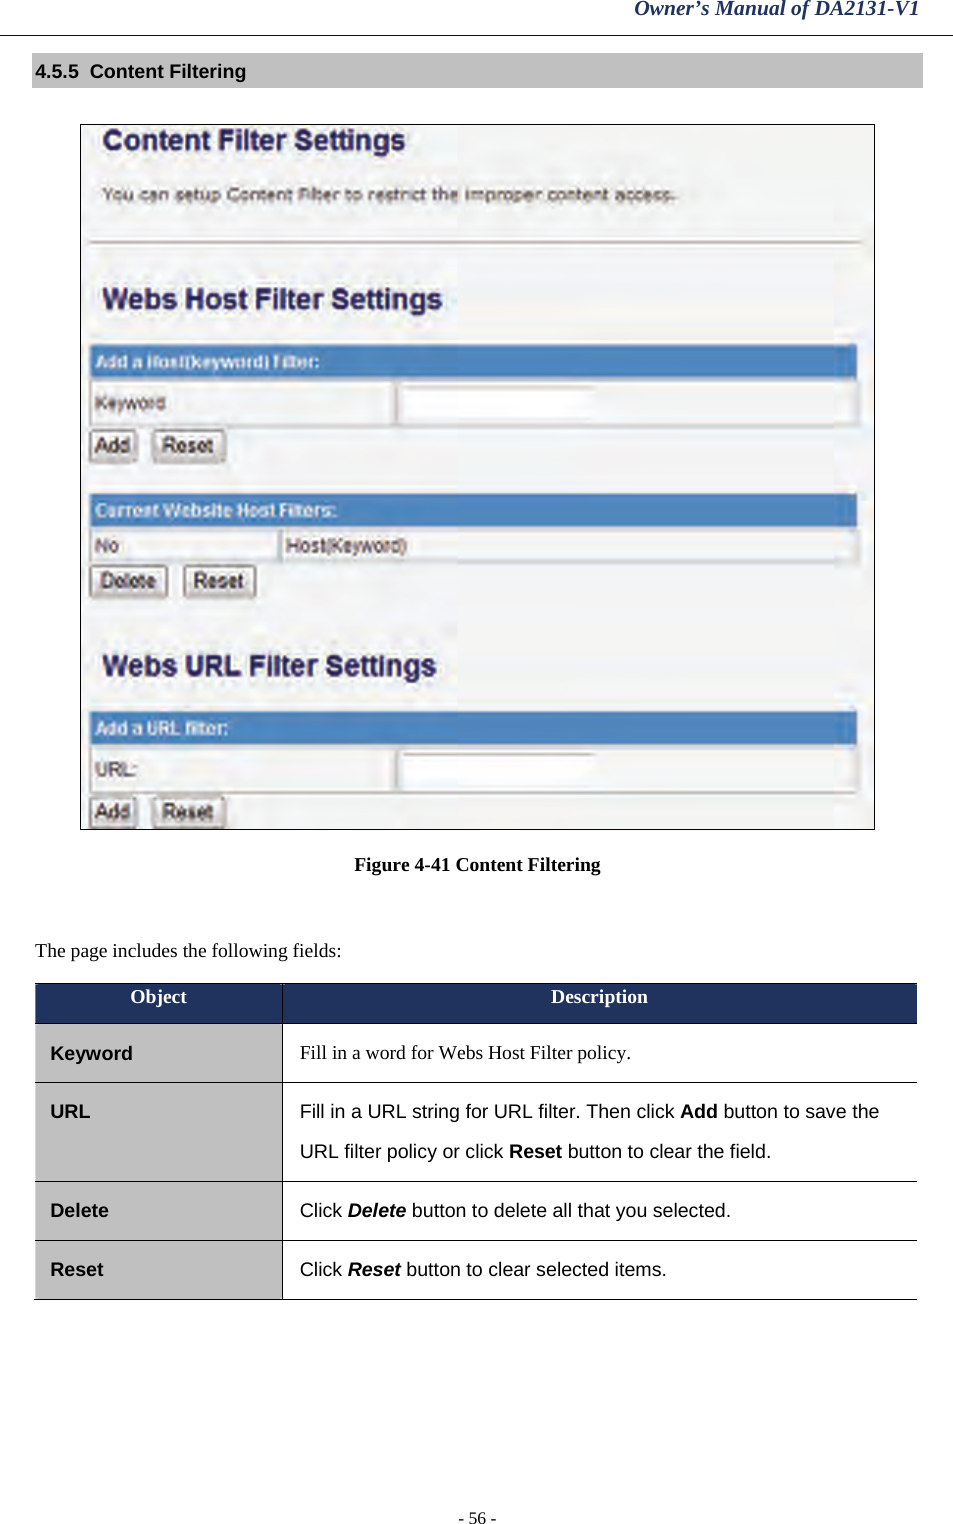 Owner’s Manual of DA2131-V1 - 56 - 4.5.5  Content Filtering  Figure 4-41 Content Filtering  The page includes the following fields: Object  Description Keyword  Fill in a word for Webs Host Filter policy. URL  Fill in a URL string for URL filter. Then click Add button to save the  URL filter policy or click Reset button to clear the field. Delete  Click Delete button to delete all that you selected. Reset  Click Reset button to clear selected items.  